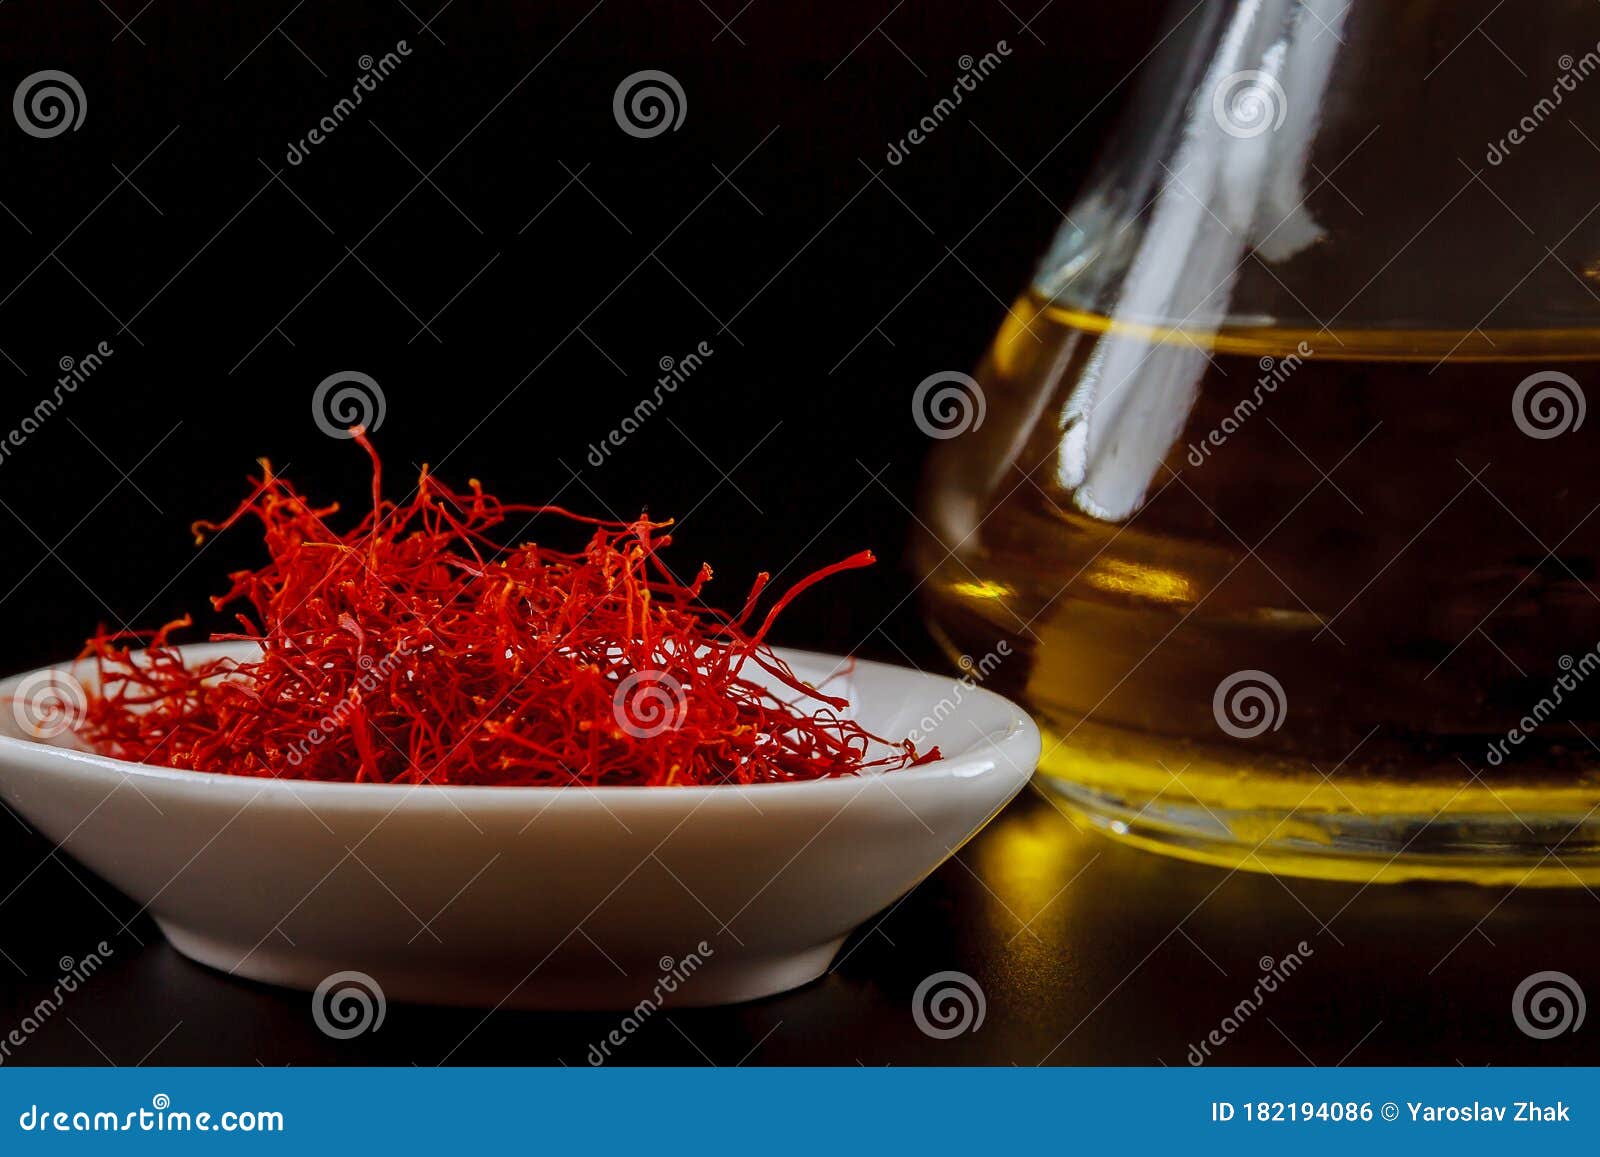 dry saffron on a white plate on black background